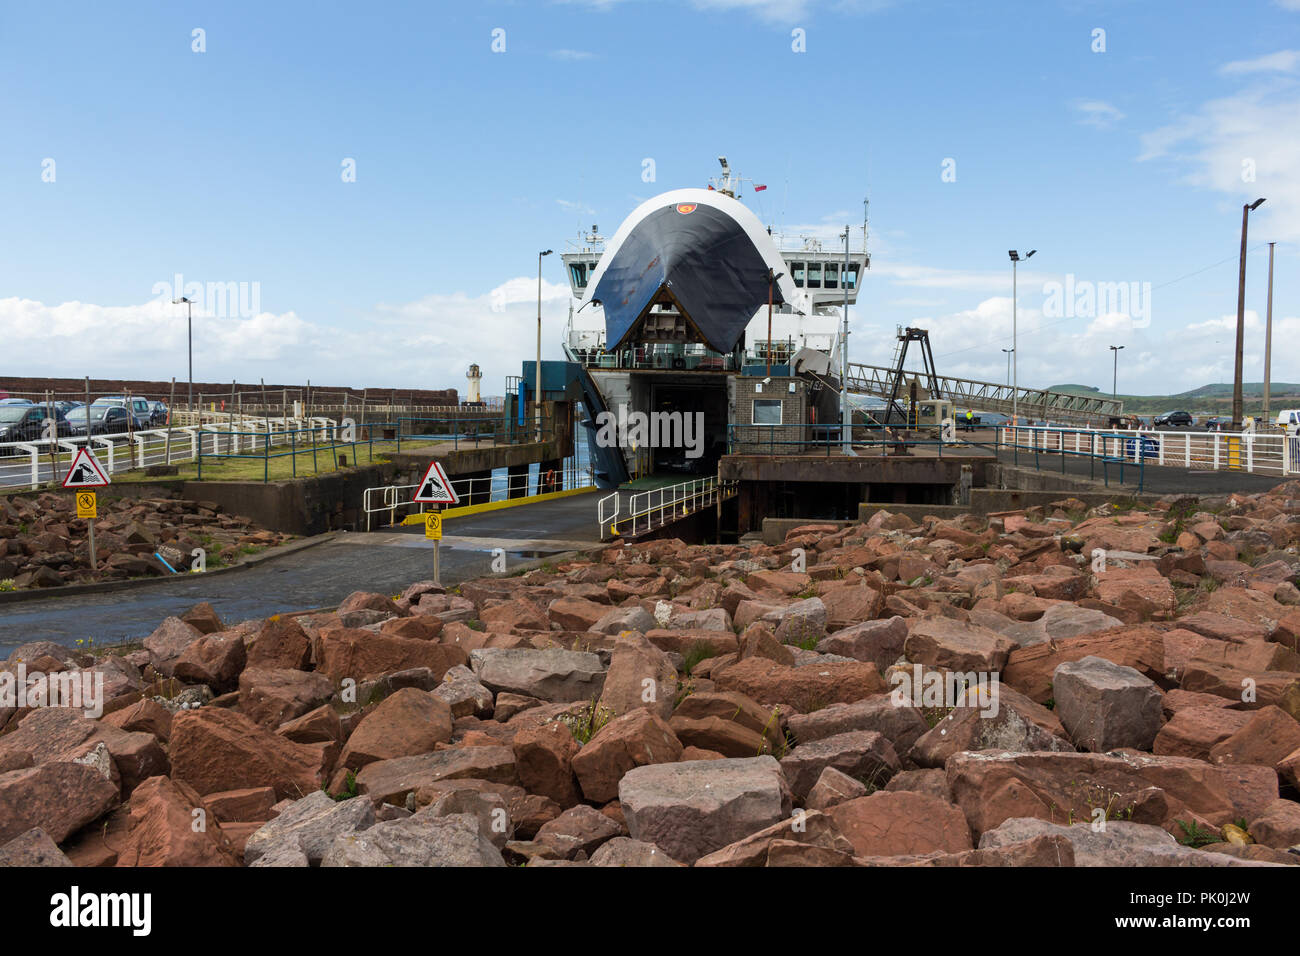 Ferry door open to allow cars and people to board. Ardrossan Harbour, Scotland. Stock Photo